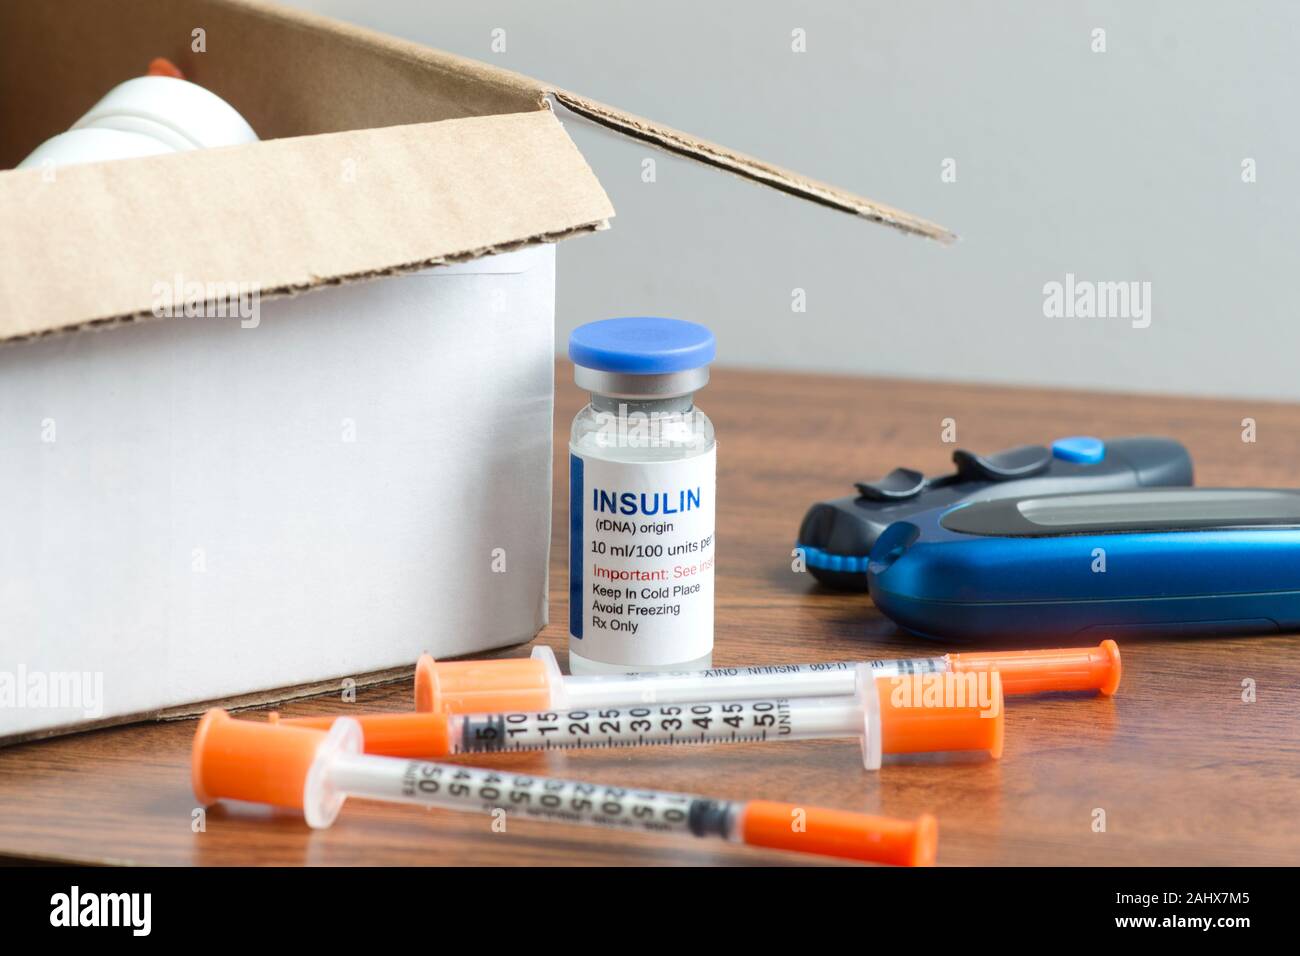 Insulin vial with syringes, test strips and other diabetic medical supplies and mailing postal box. Stock Photo